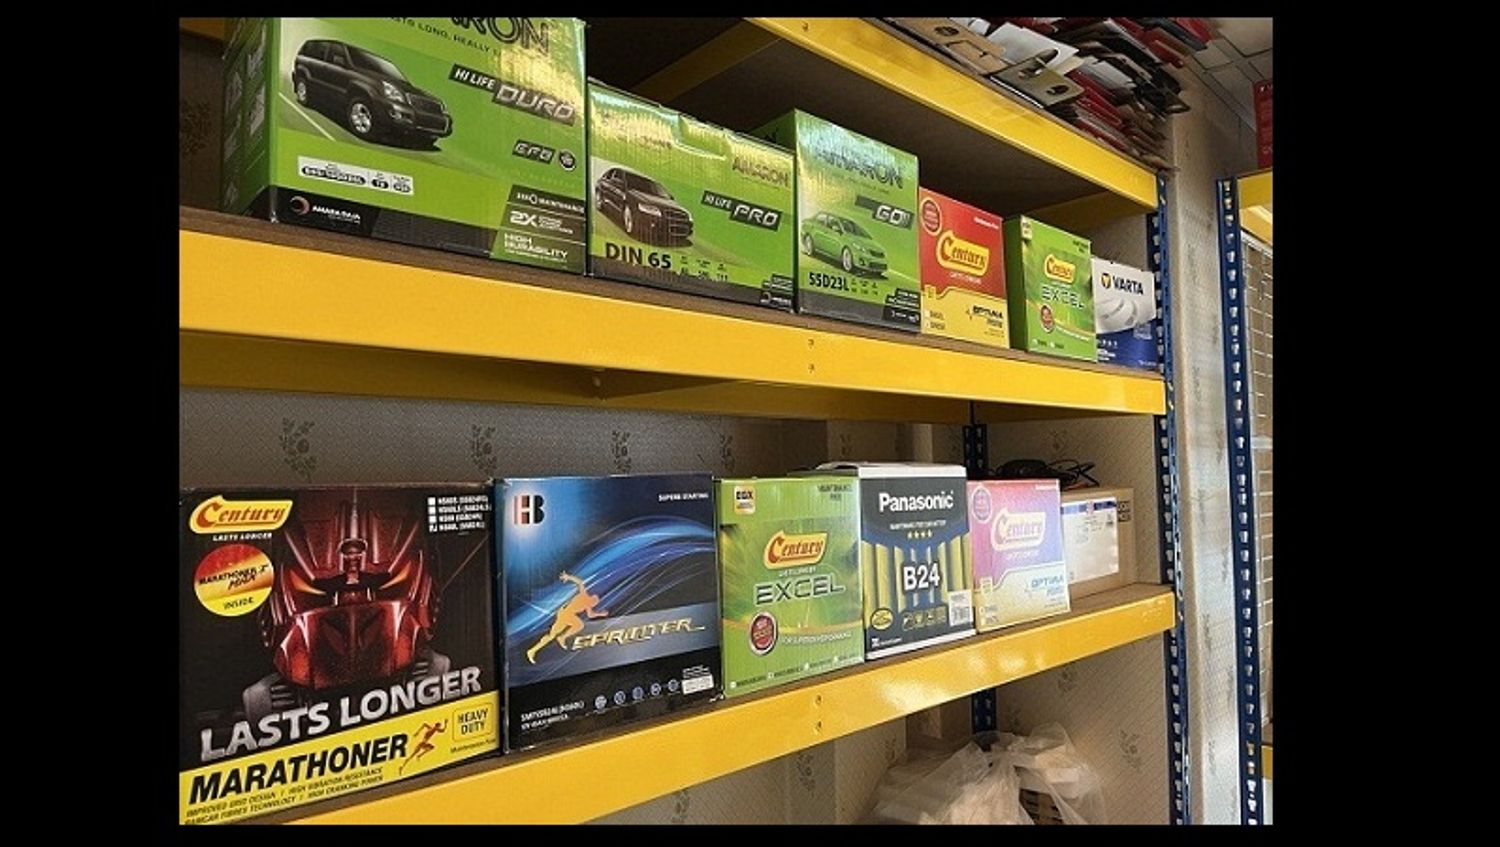 Bateri Puncak Alam .com - Serving you with the best range of products. We carry various brands and price range to suit your budget and usage. Chose your battery like a pro!